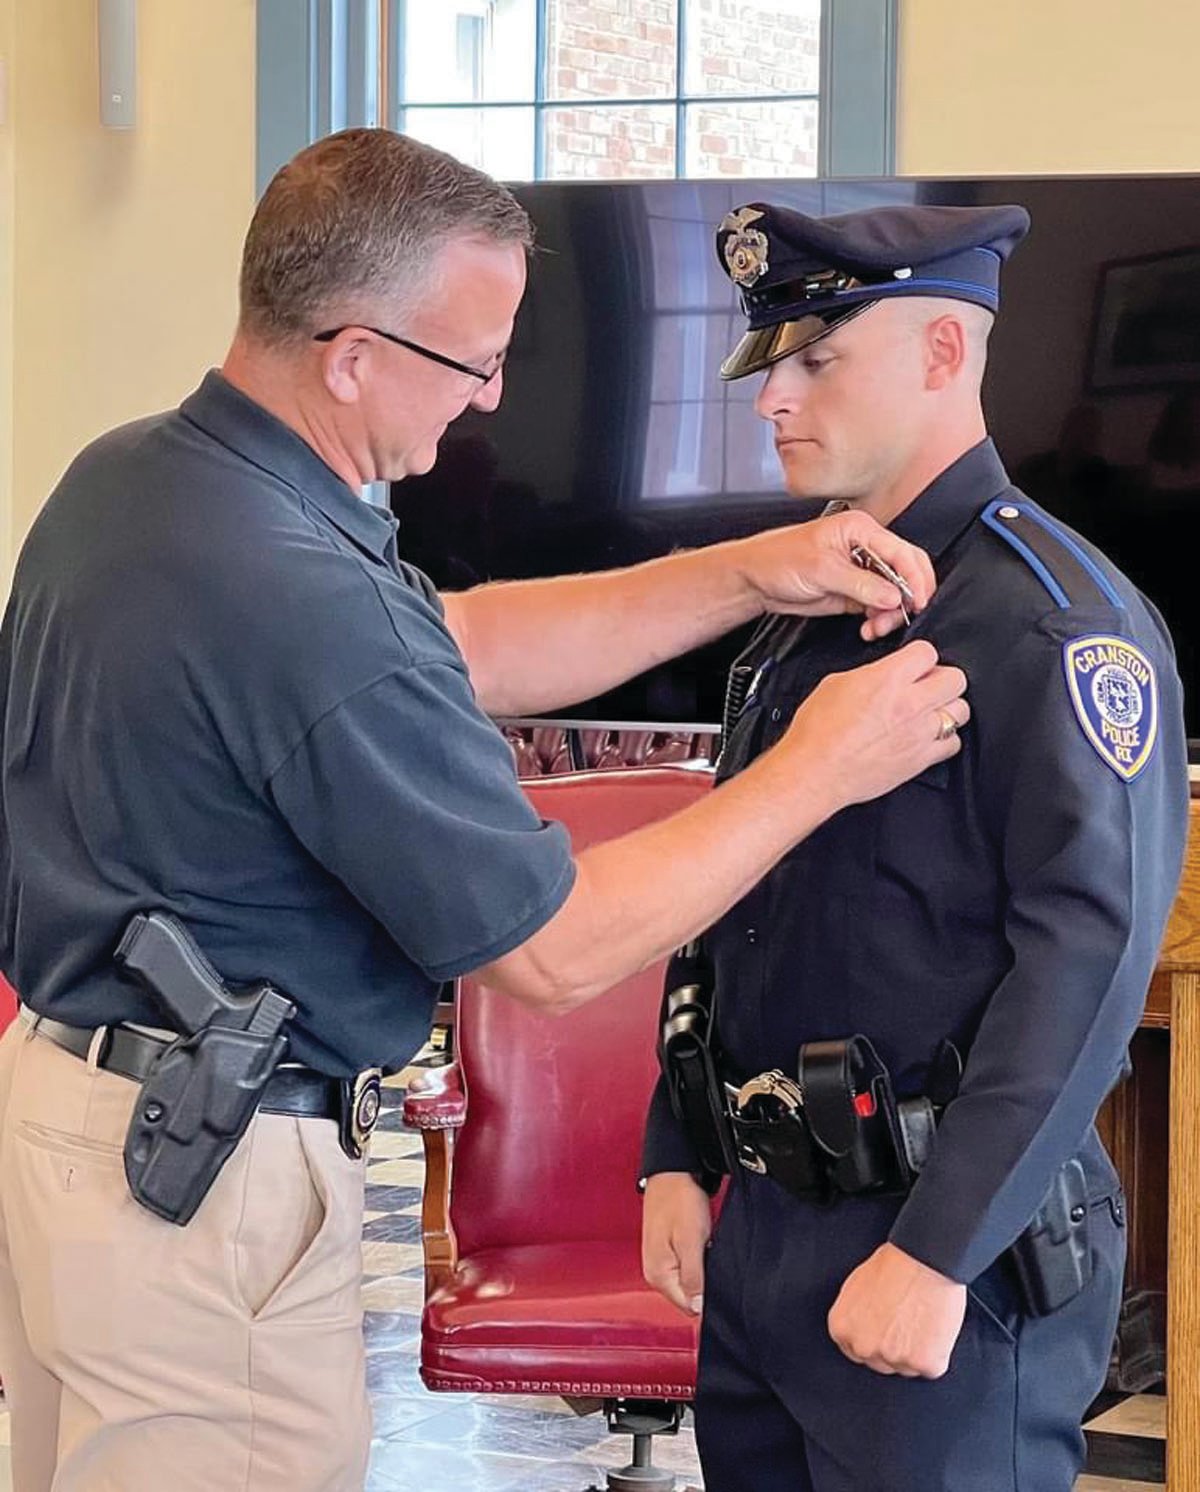 FATHER AND SON: Coventry Police Detective Sgt. Kevin Nolan pins the badge on his son, newly sworn-in Cranston Police Officer Michael Nolan, during last week’s ceremony